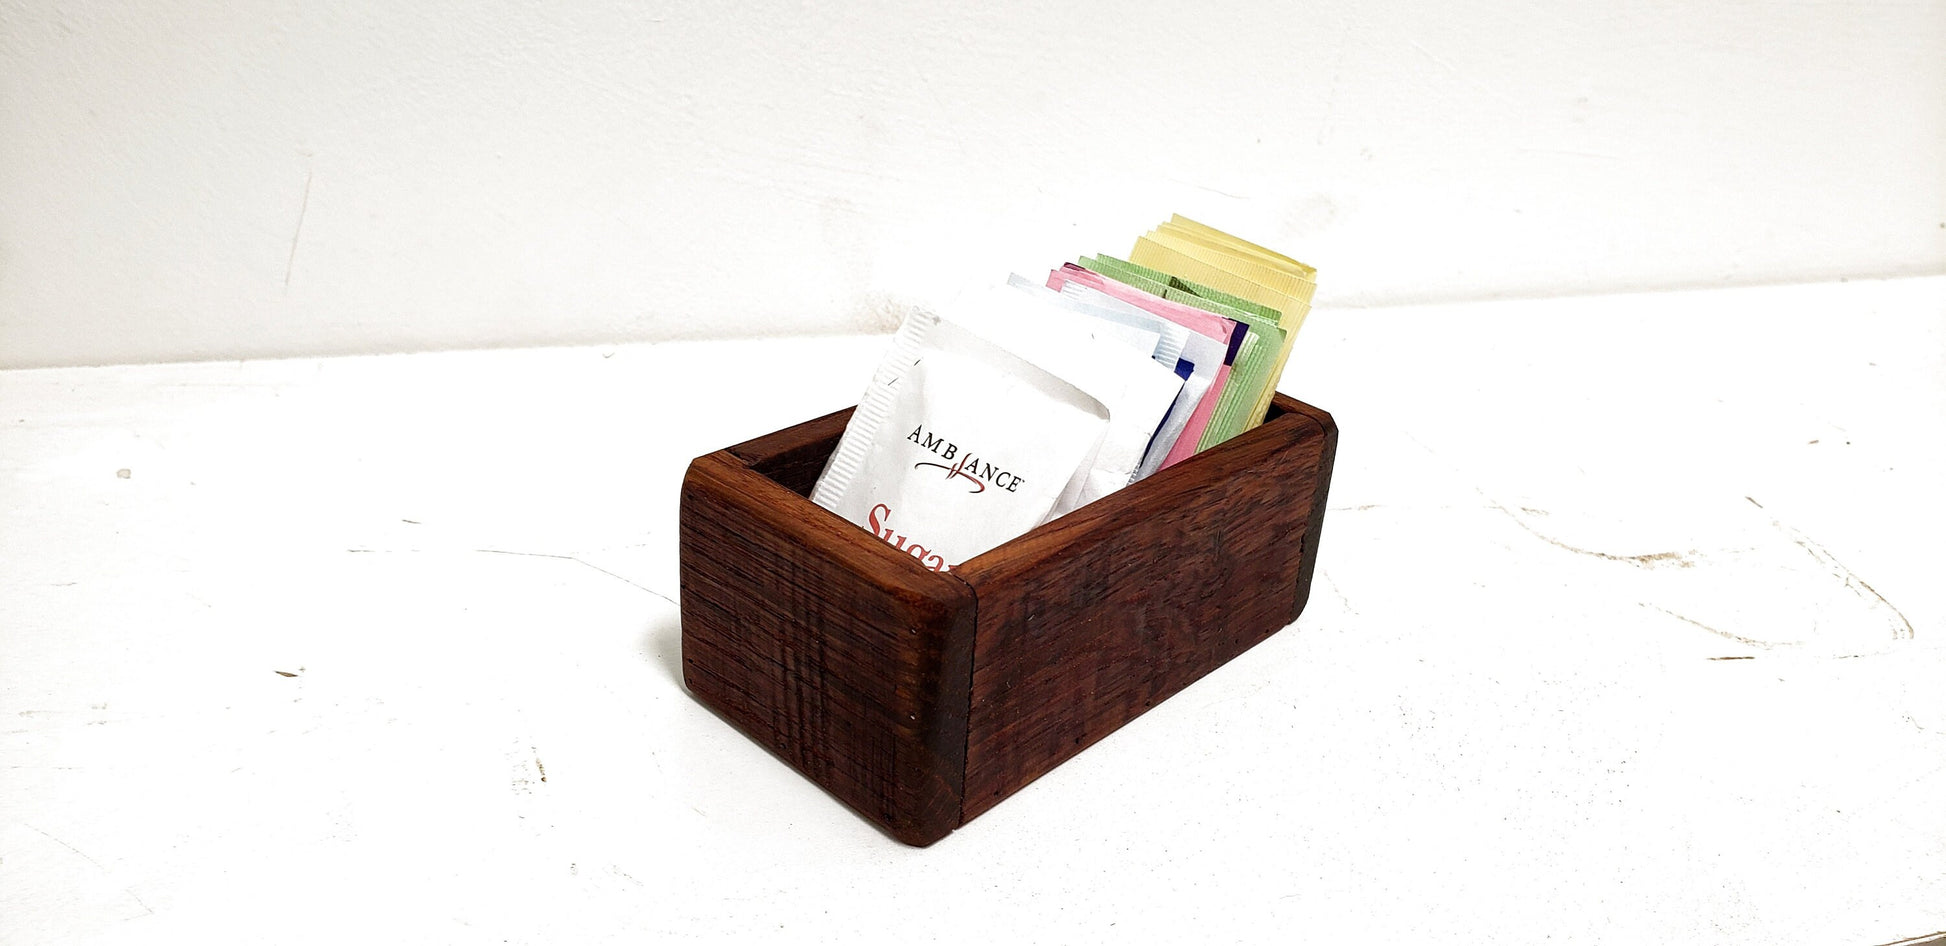 Wine Barrel Business Card / Sugar Holder - Kohua - Made from retired CA wine barrels 100% Recycled!